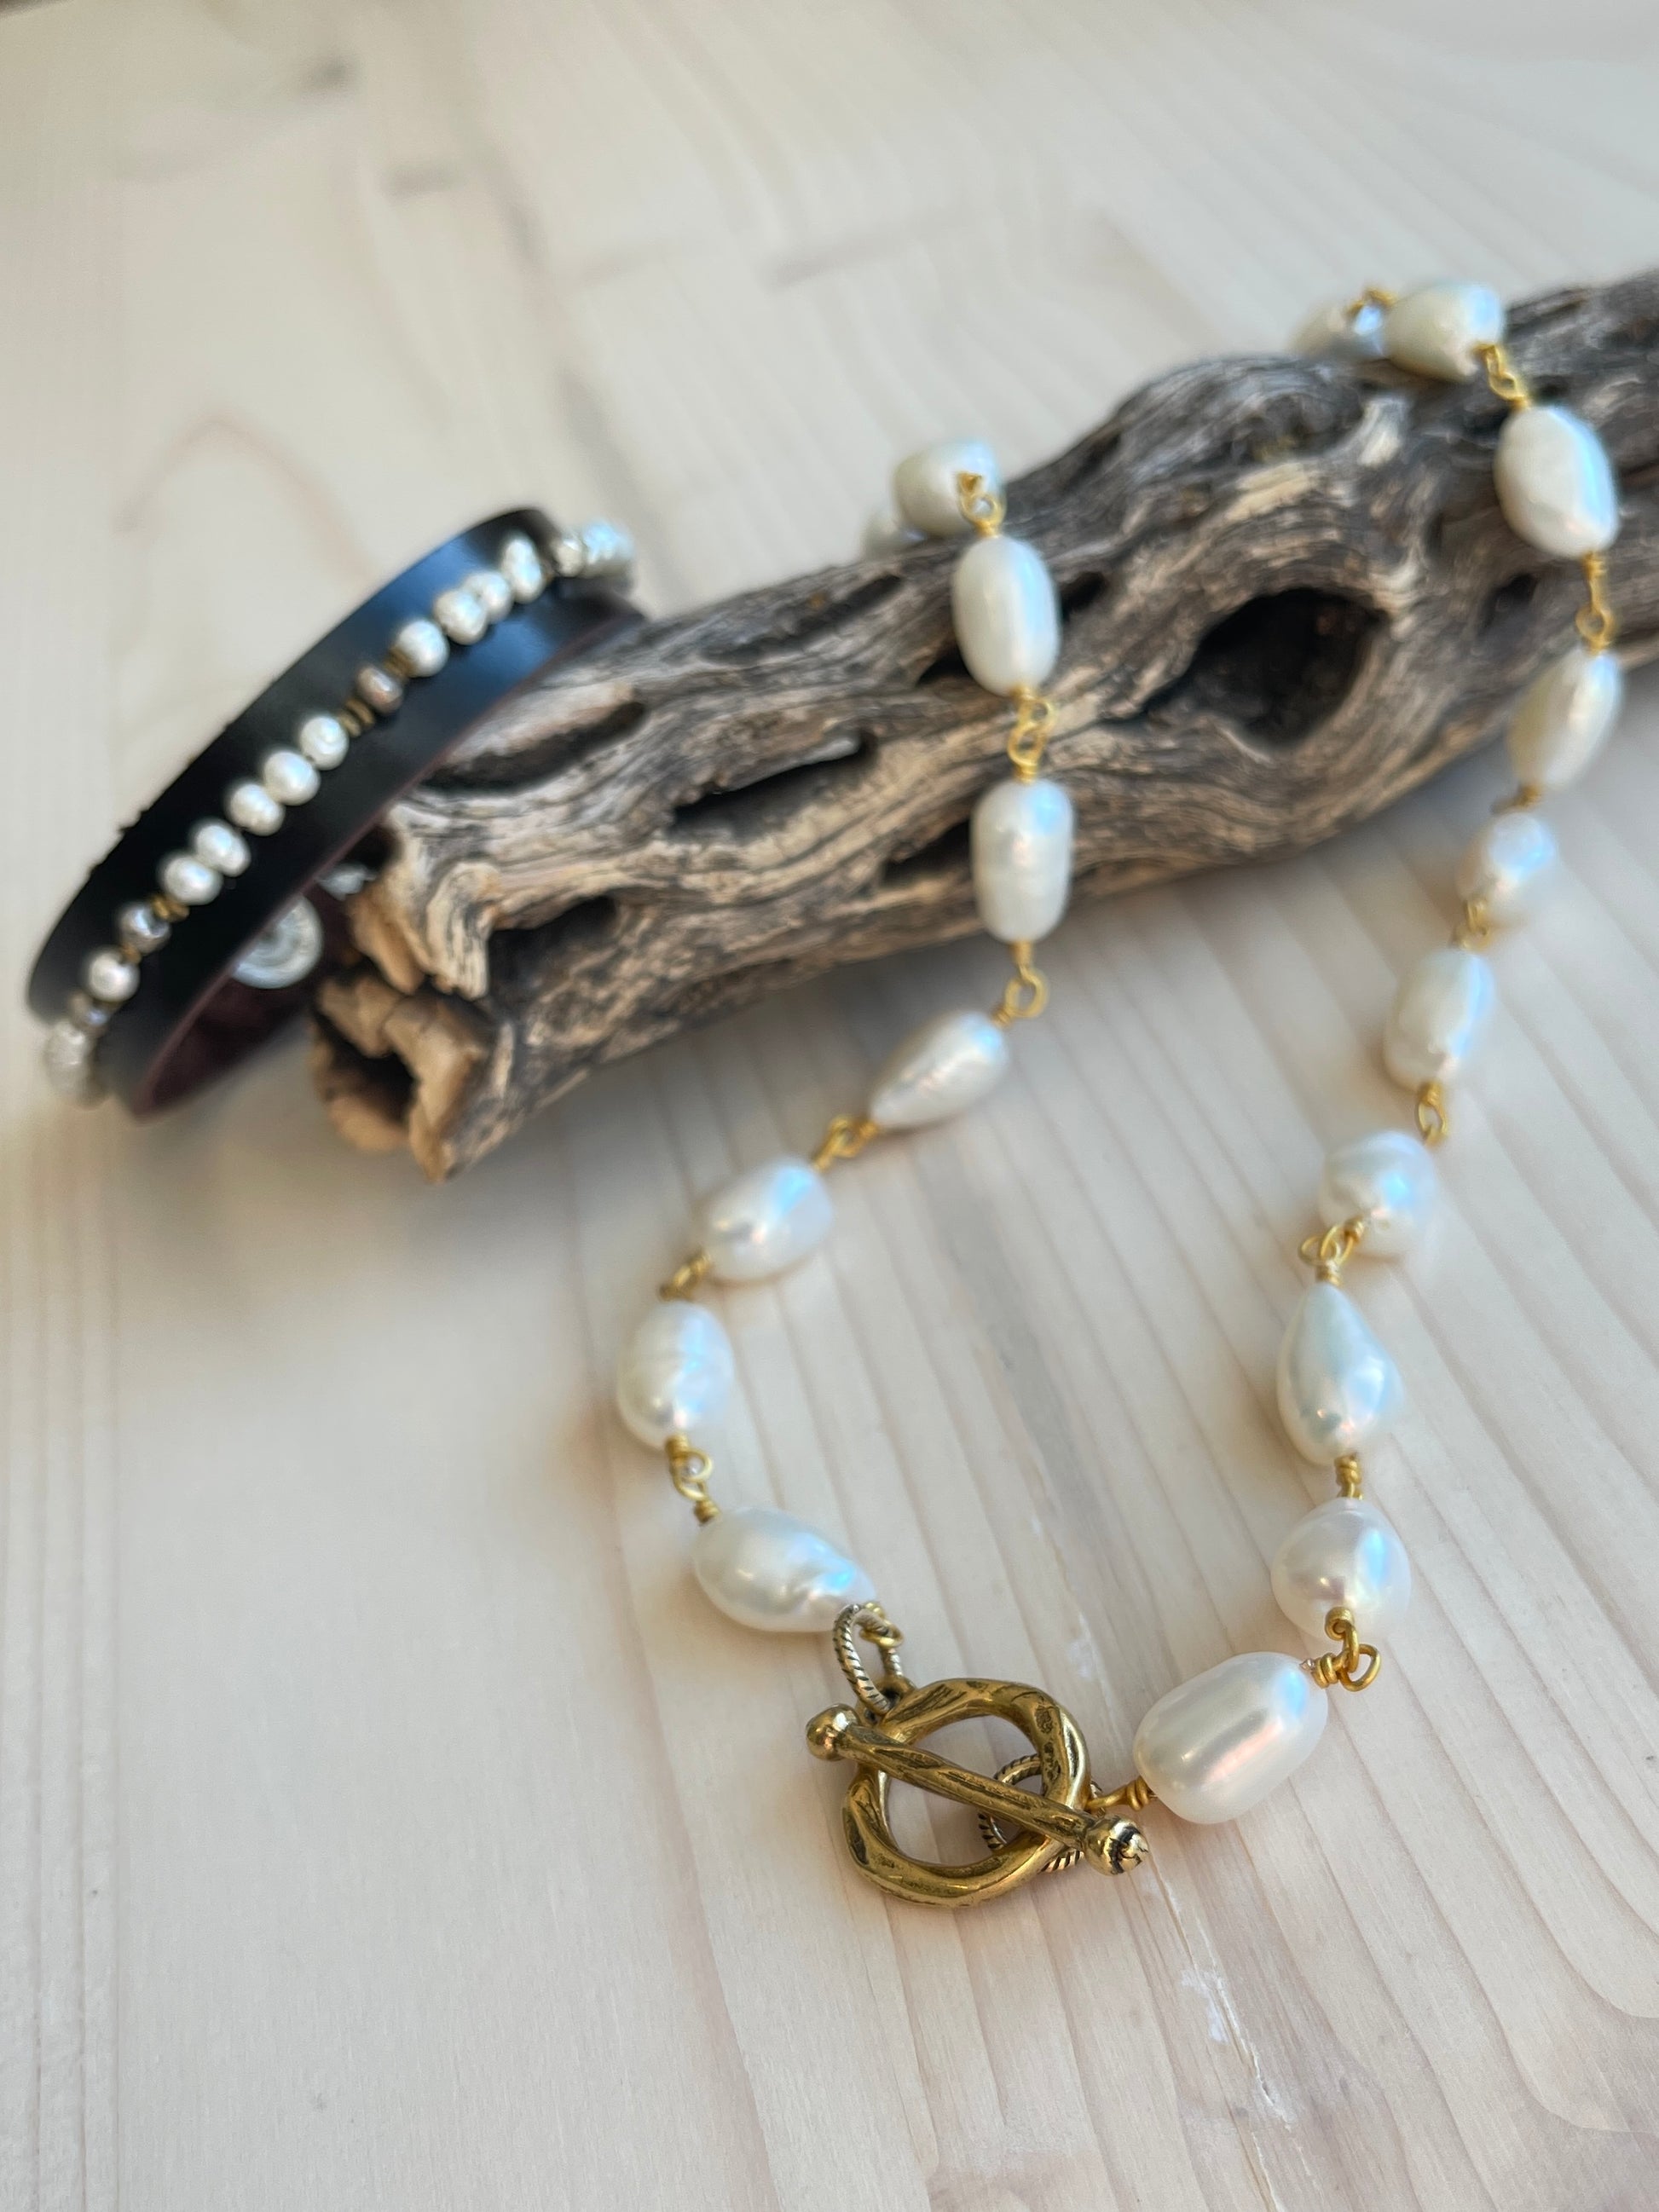 Blair Bracelet displayed on driftwood with pearl choker